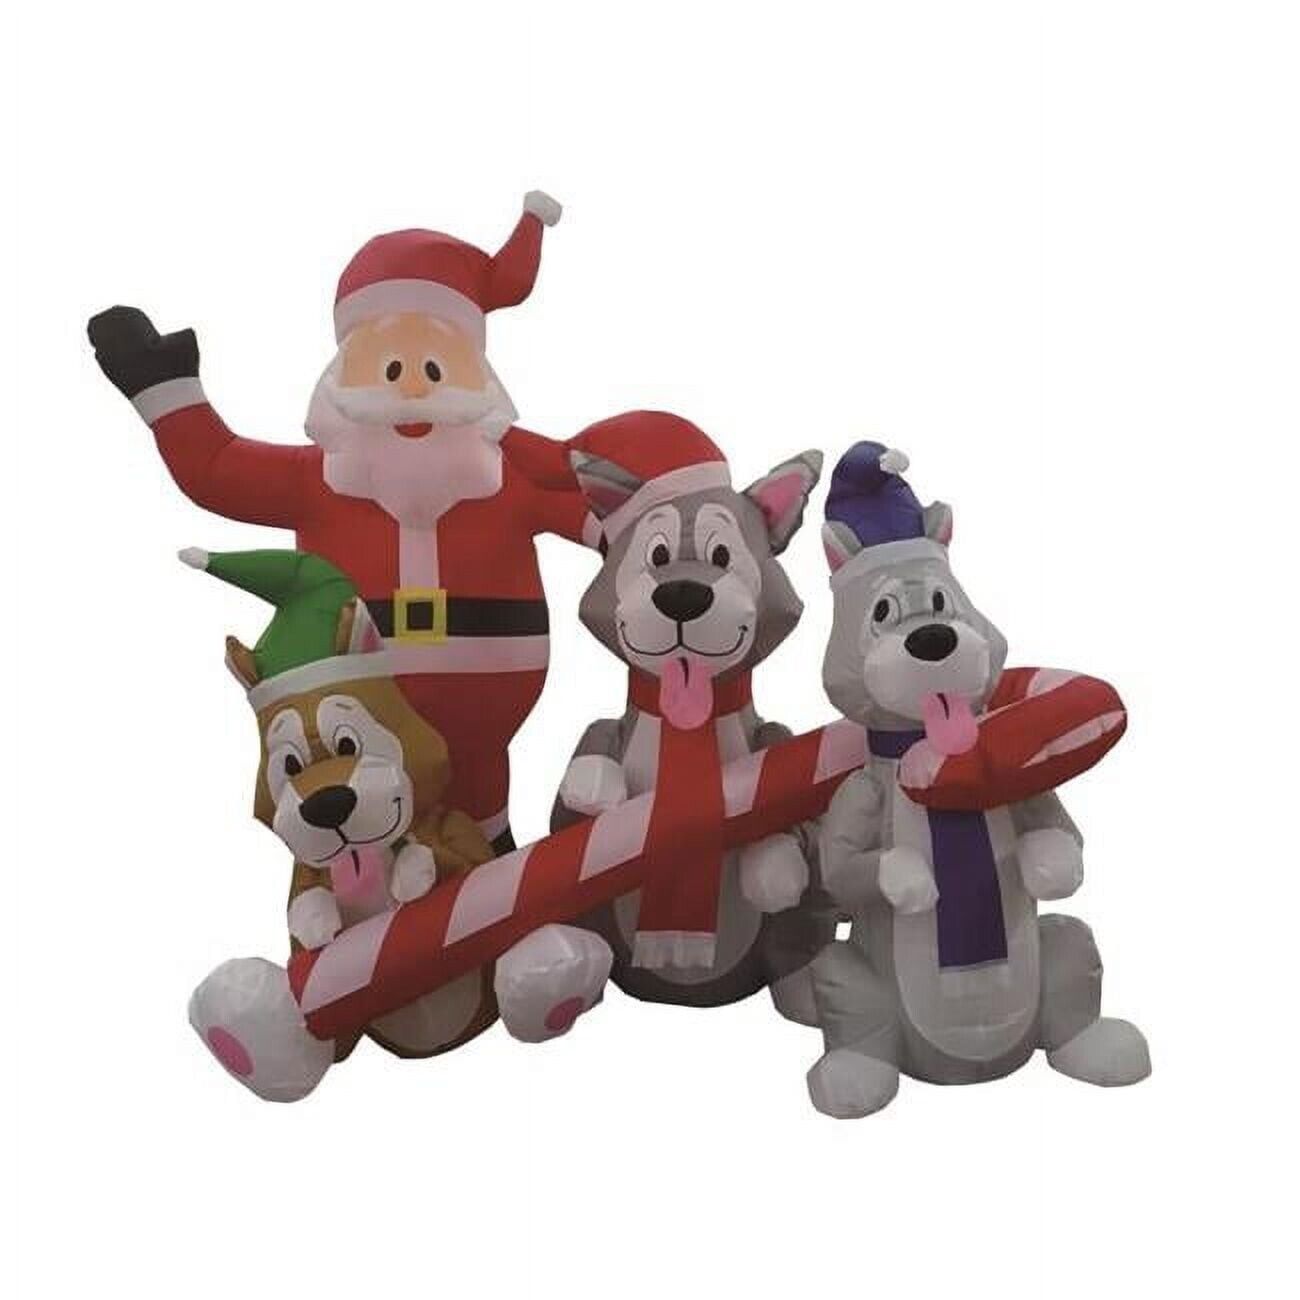 Celebrations 9086814 6 ft. Inflatable Santa with Dogs